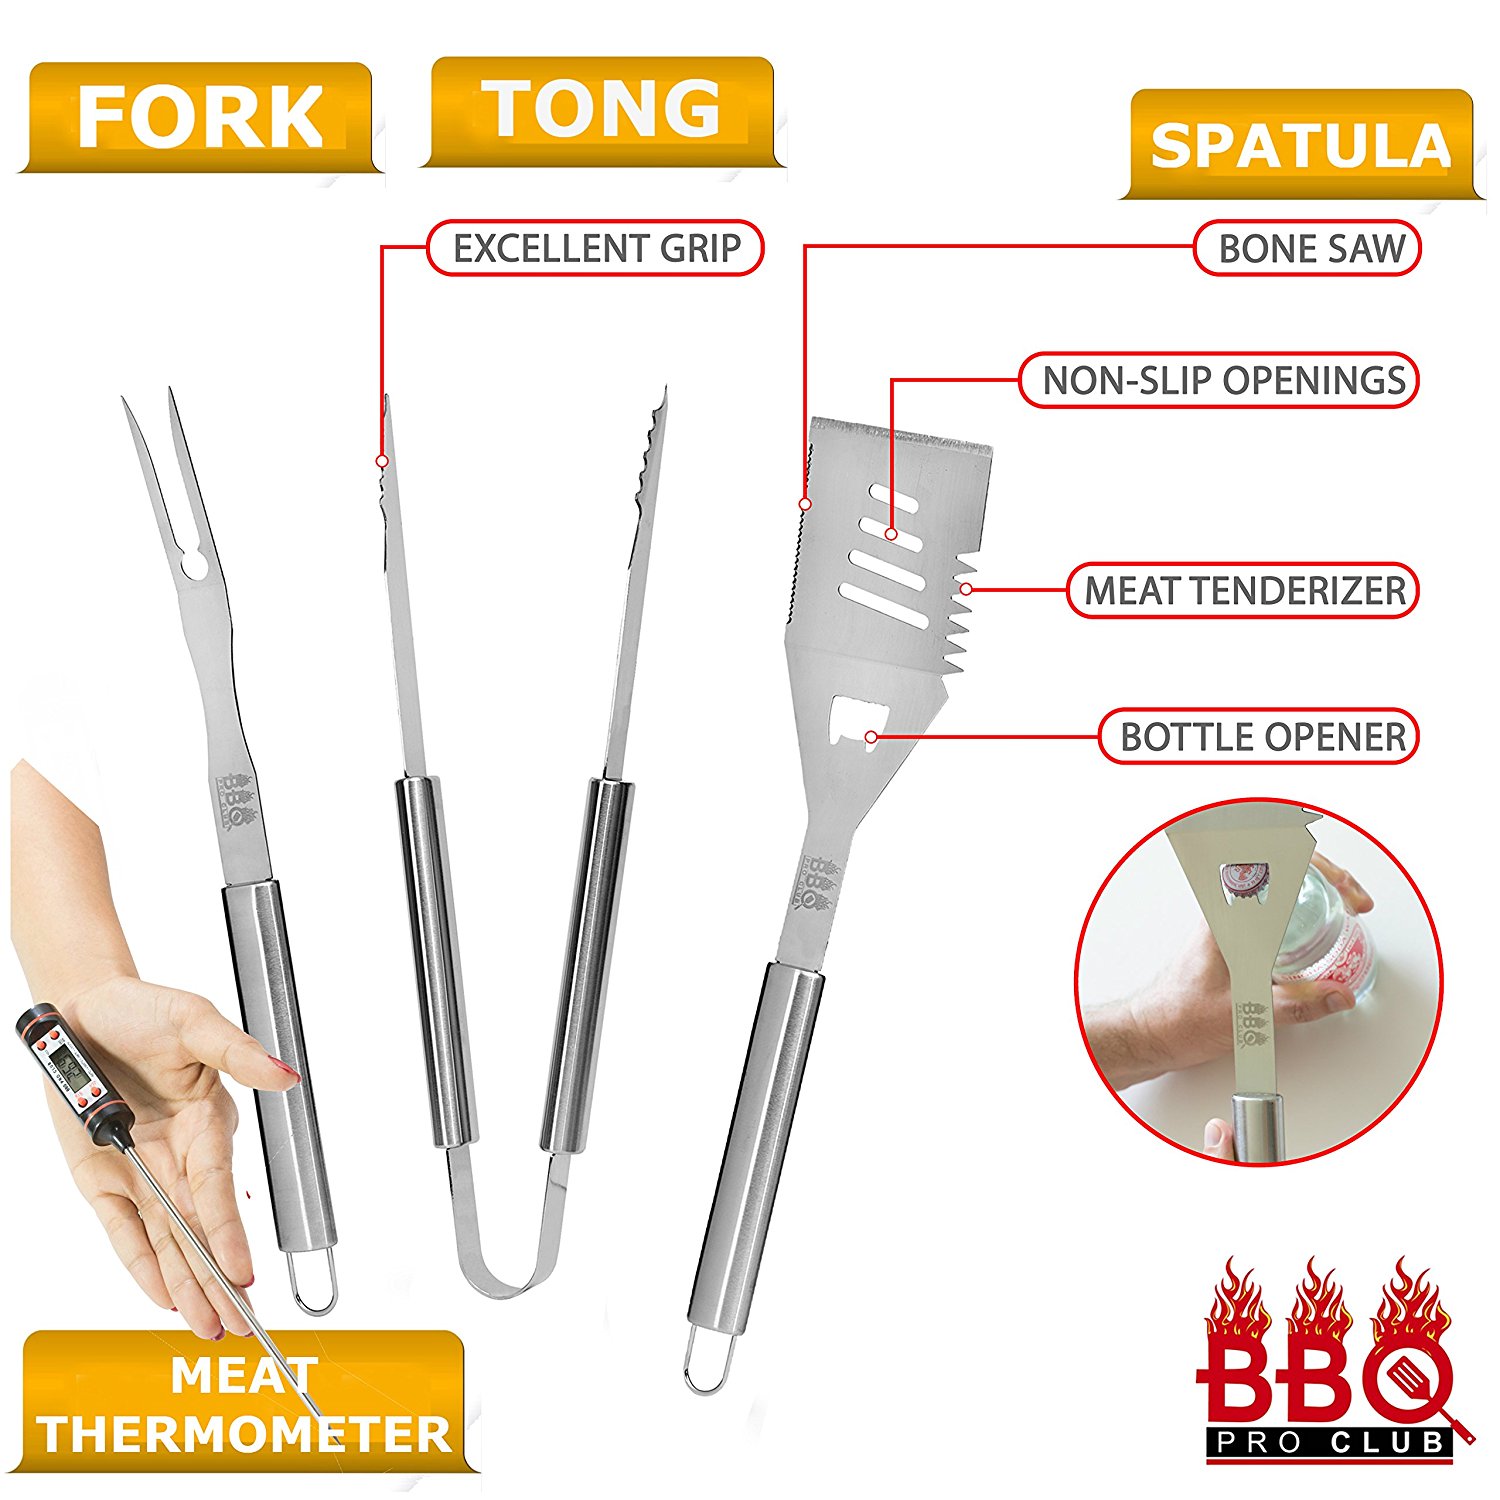 Grill Accessories, 4 piece BBQ Tool Grill Set - Grill Tools Includes Stainless Steel Metal Spatula, Fork, Tongs and Instant Read Meat BBQ Thermometer, Great For Gifts - By BBQ Pro Club - image 2 of 7